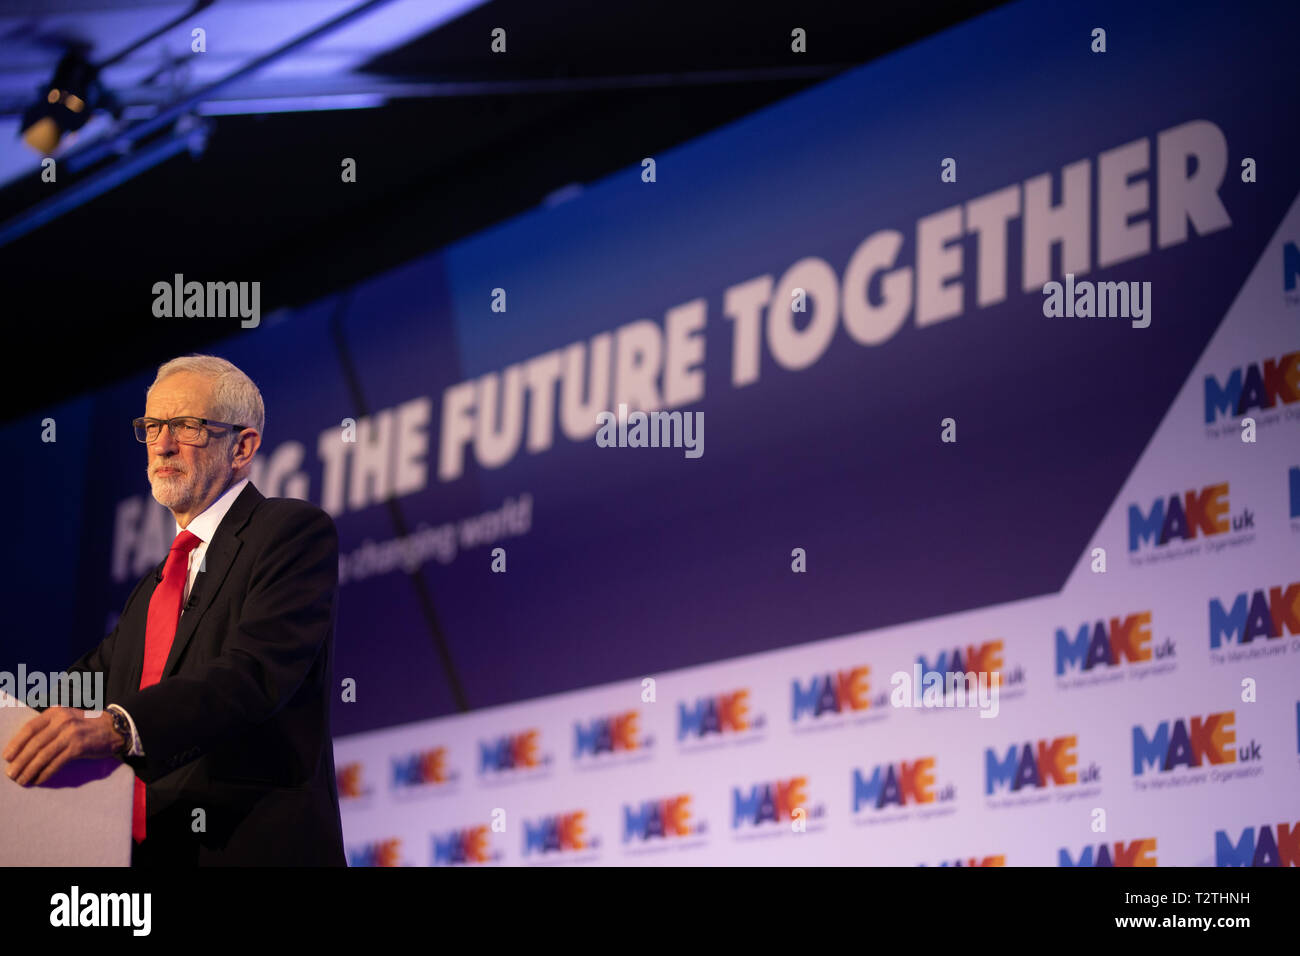 Jeremy Corbyn speaks to the EEF (Engineering Employers' Federation) at the Queen Elizabeth II Centre, London, UK. Stock Photo